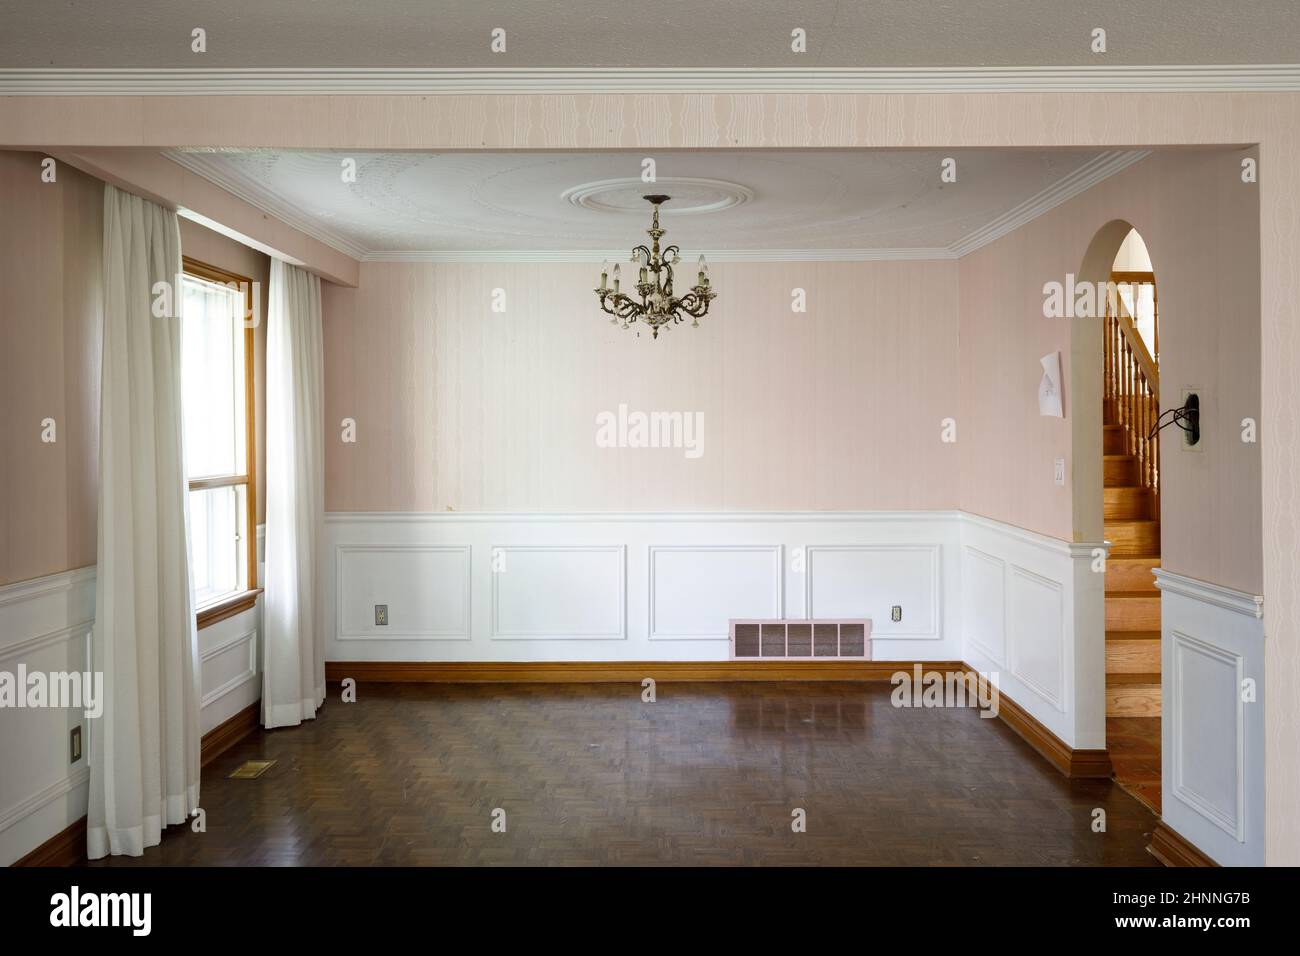 A vintage 1950s dining room with a stucco decorative ceiling. Stock Photo